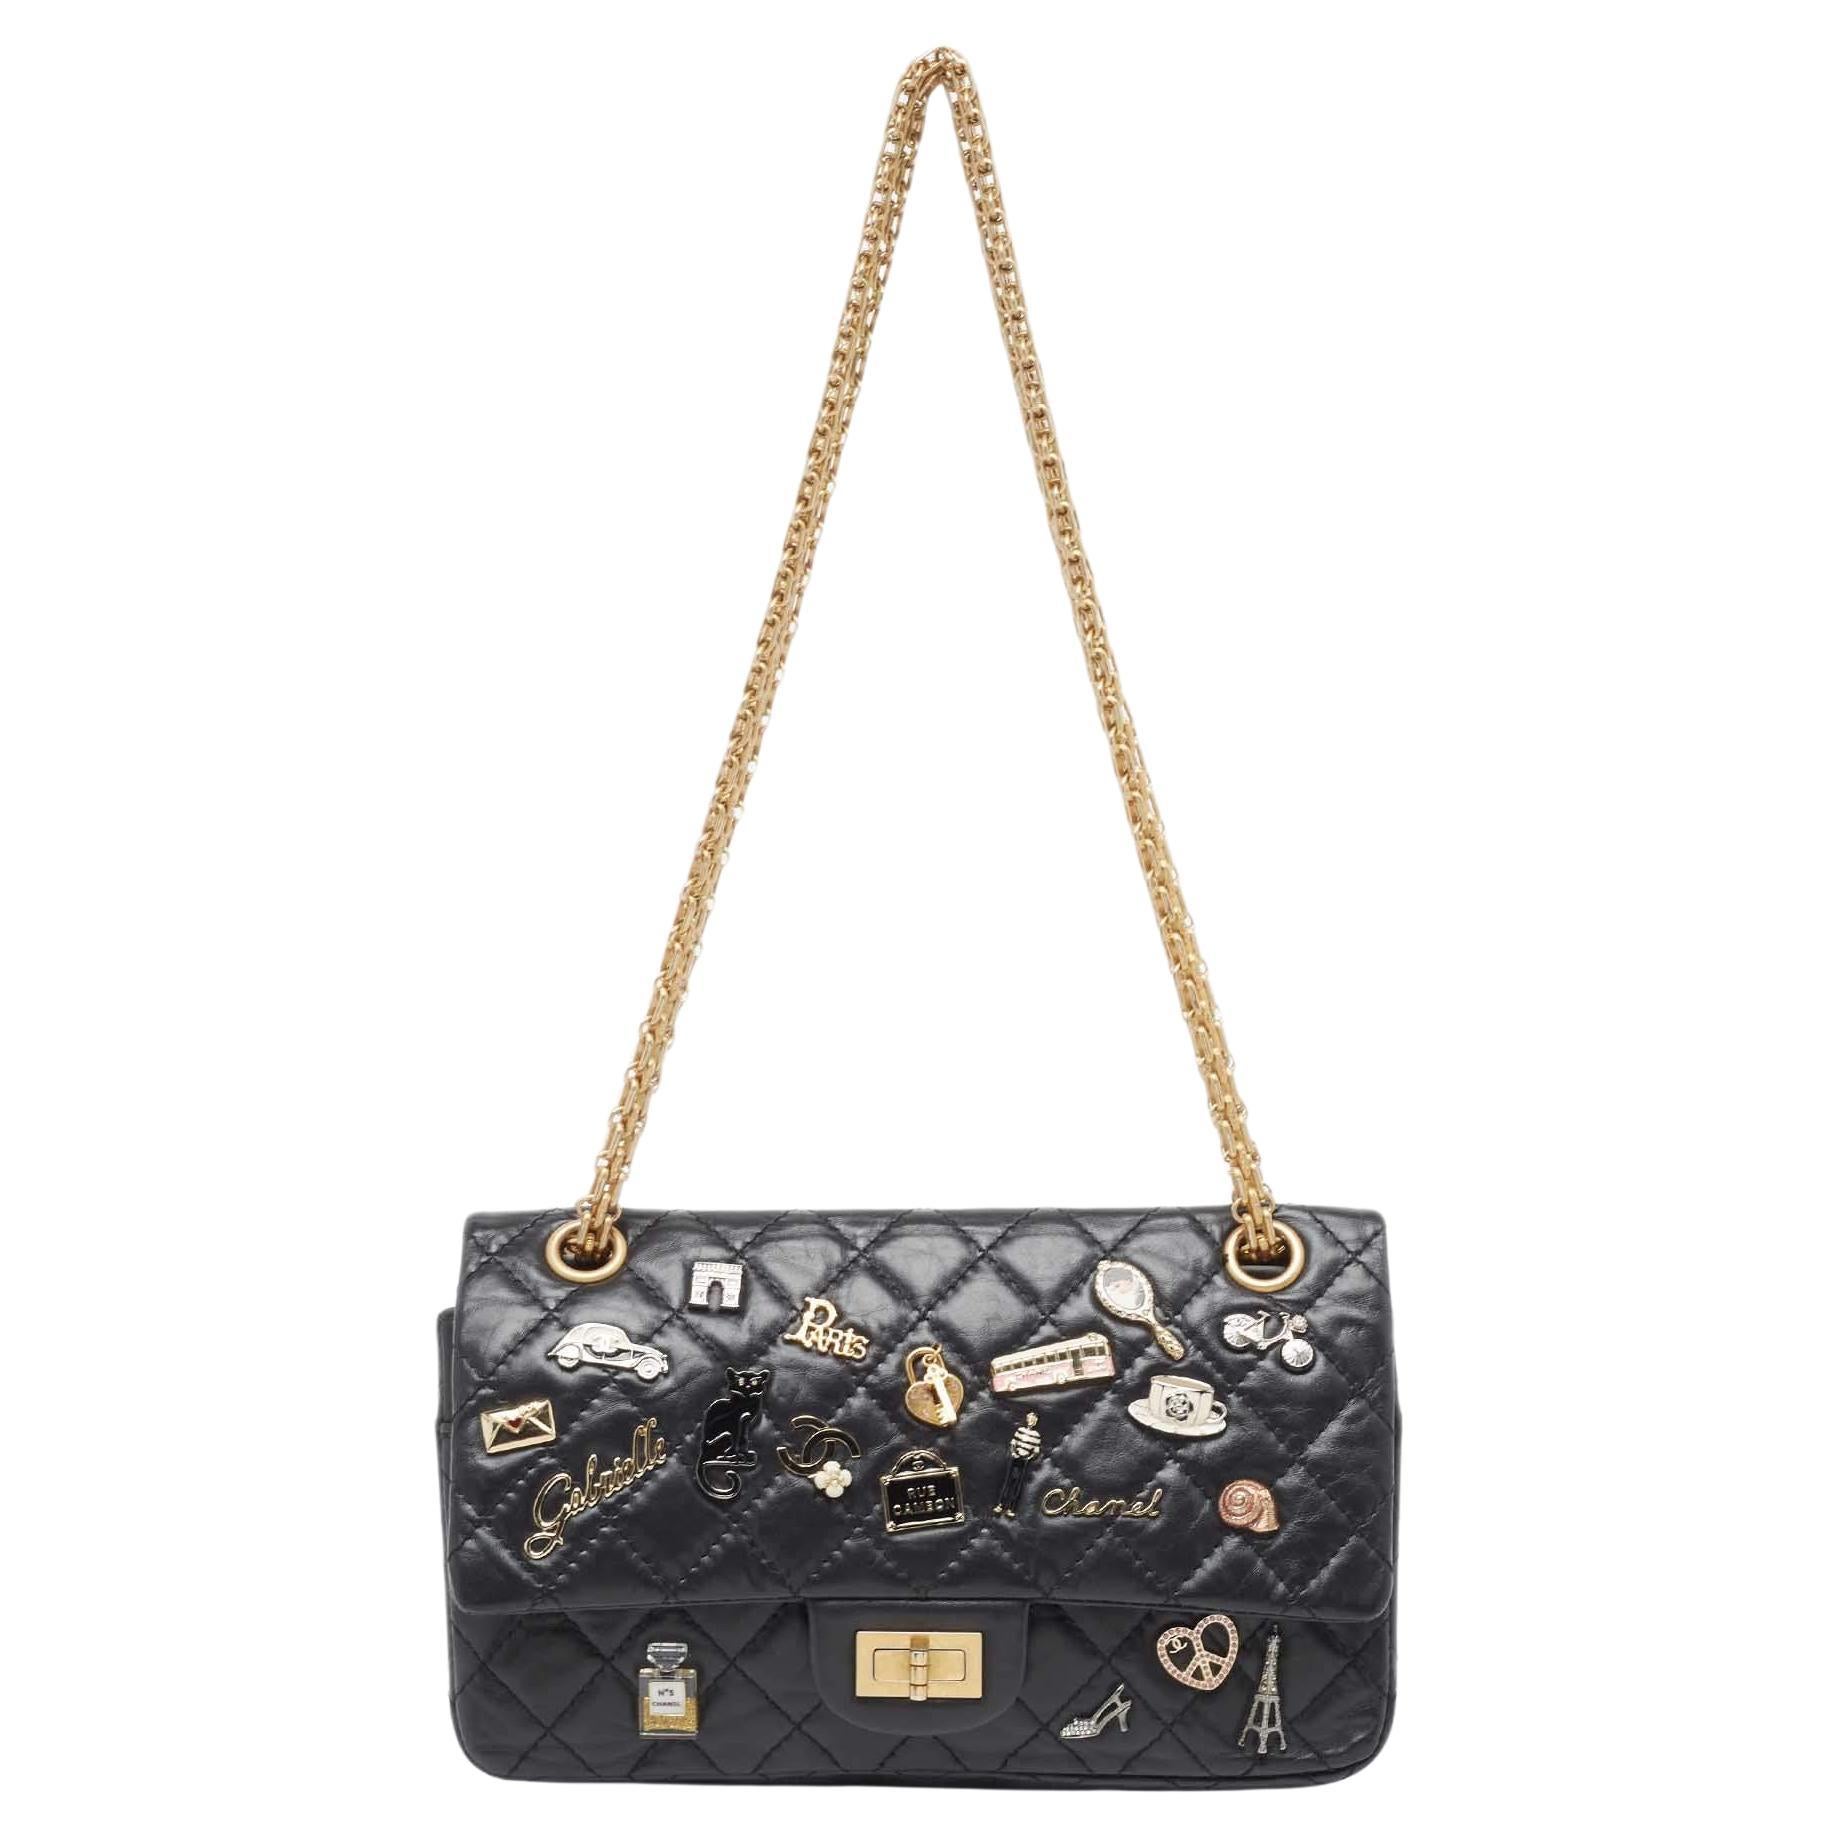 Chanel Black Quilted Aged Leather 225 Lucky Charm Reissue 2.55 Flap Bag